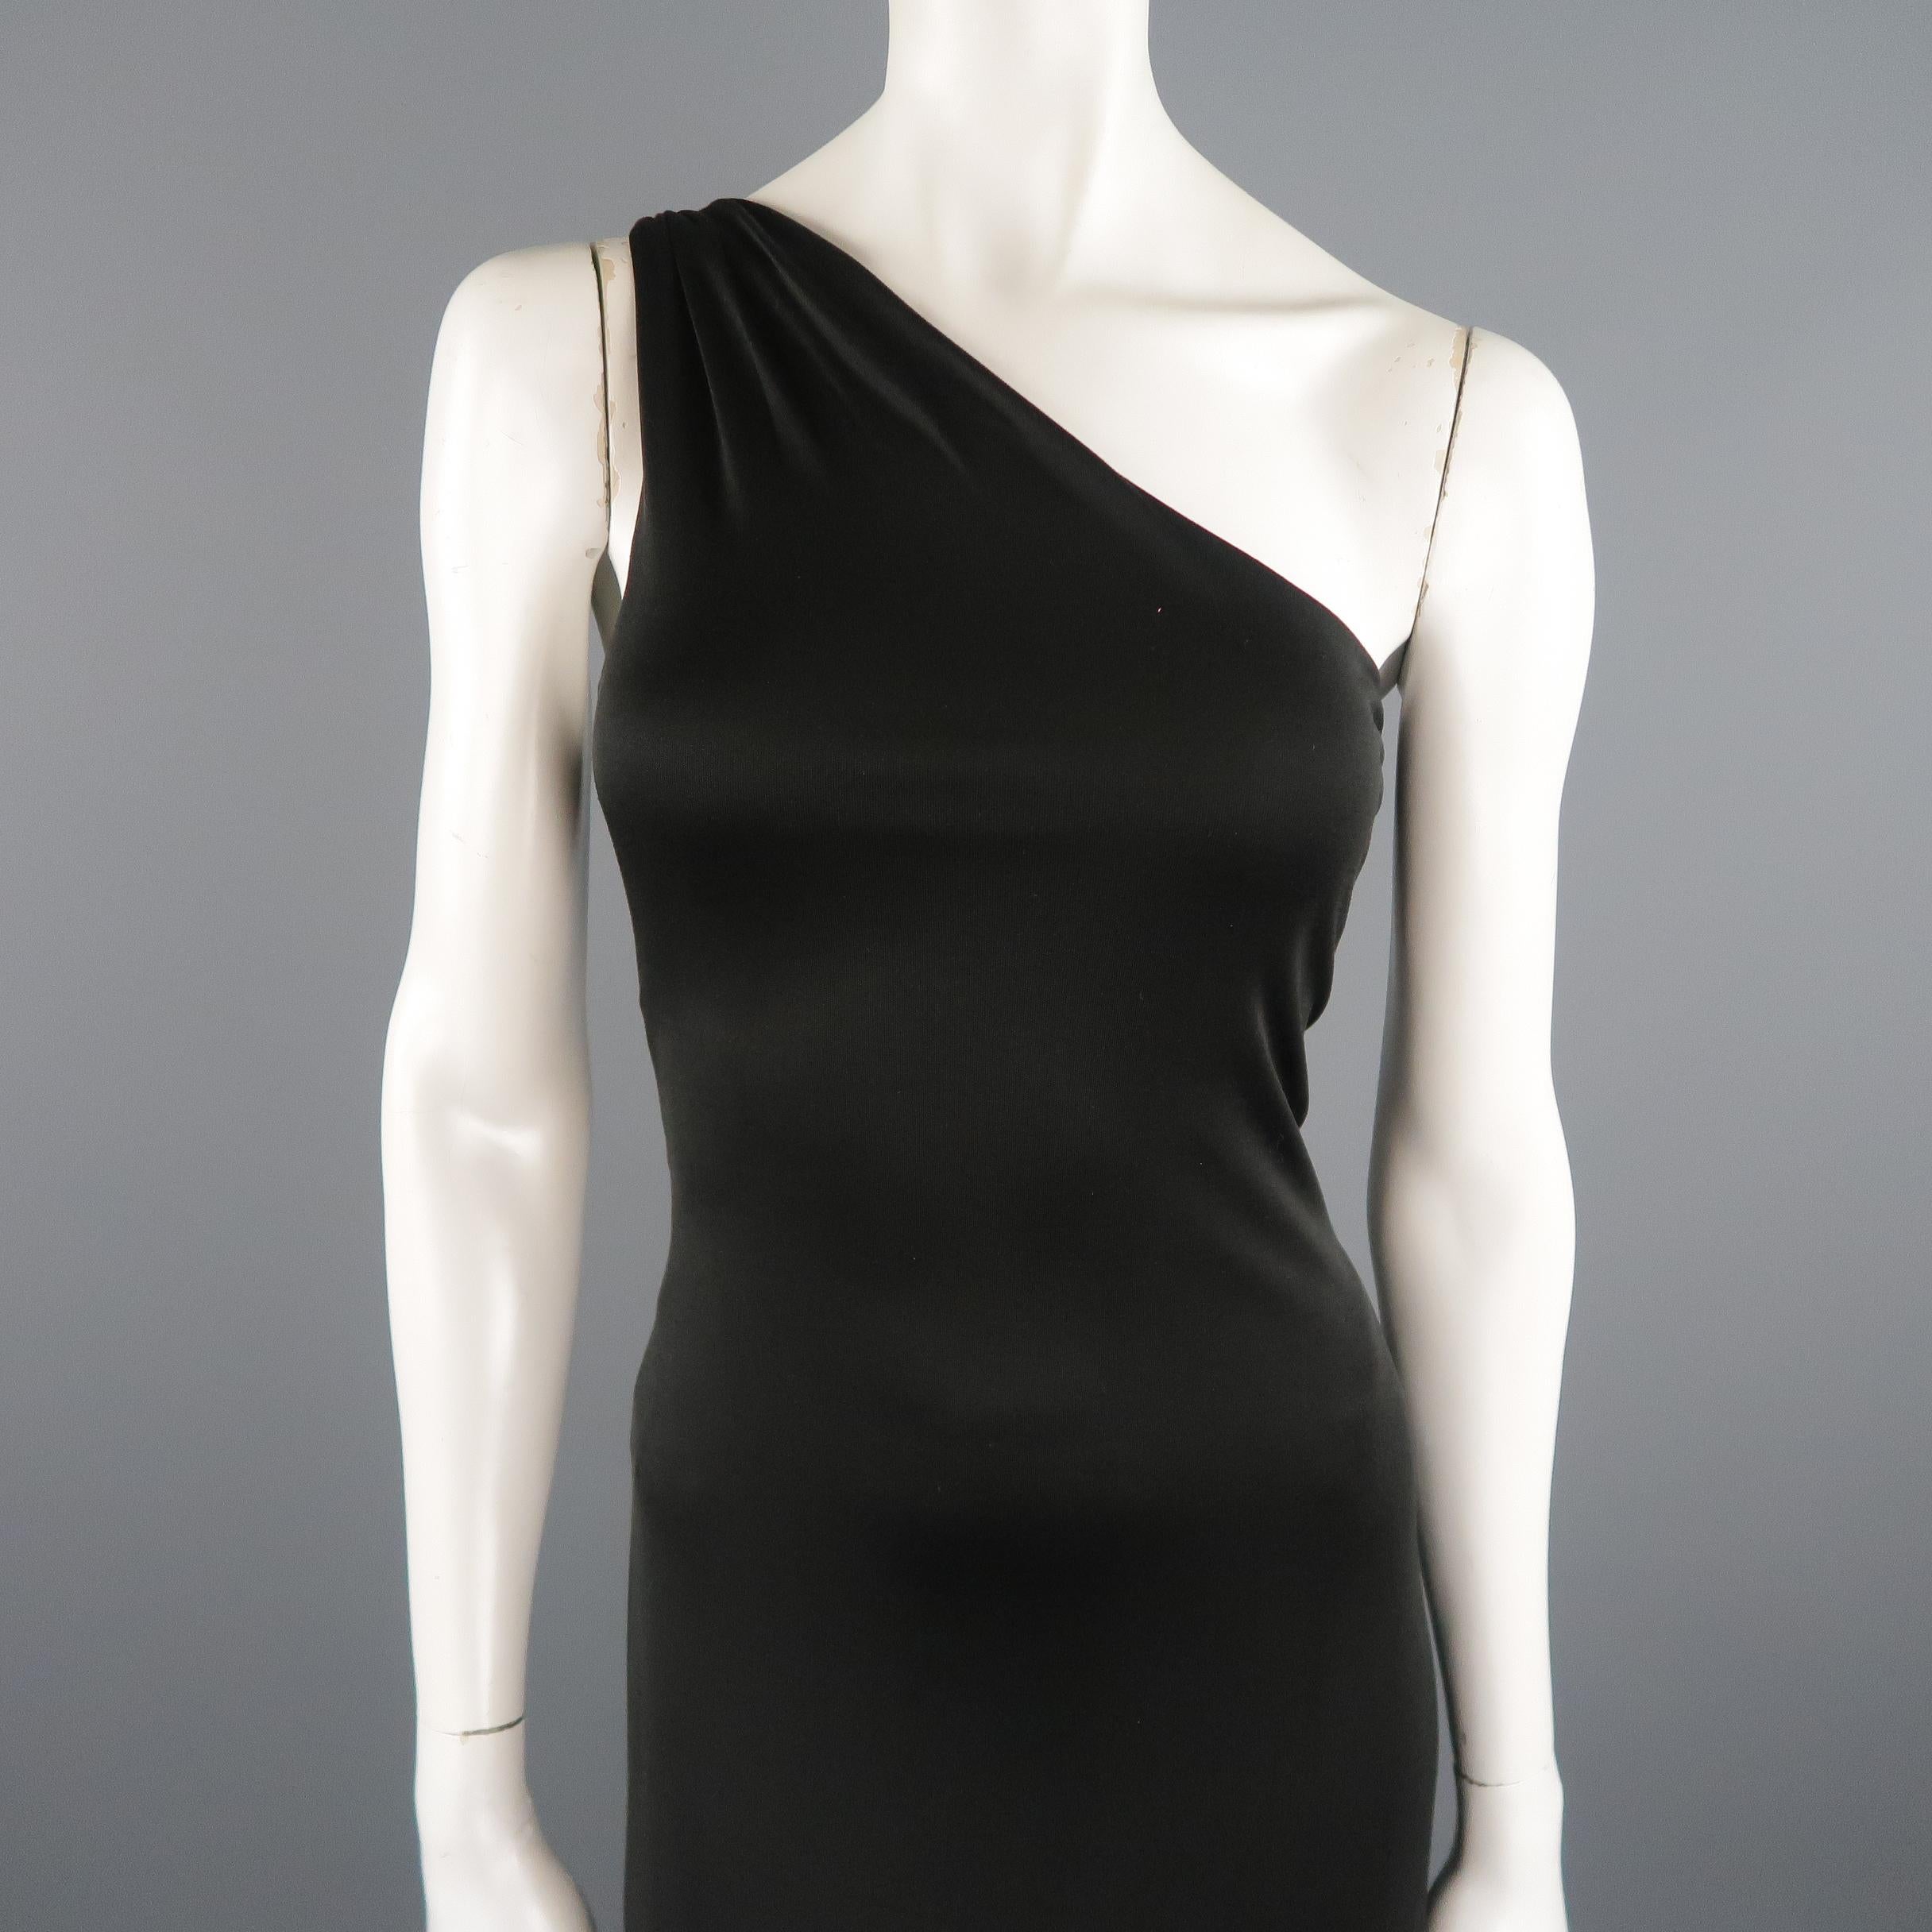 RALPH LAUREN COLLECTION gown comes in black silk jersey knit with a gathered one shoulder strap neckline and fitted A line silhouette. Made in USA.  Retailed $1,680
 
Excellent / Very Good Pre-Owned Condition.
Marked: 10
 
Measurements:
 
Bust: 40